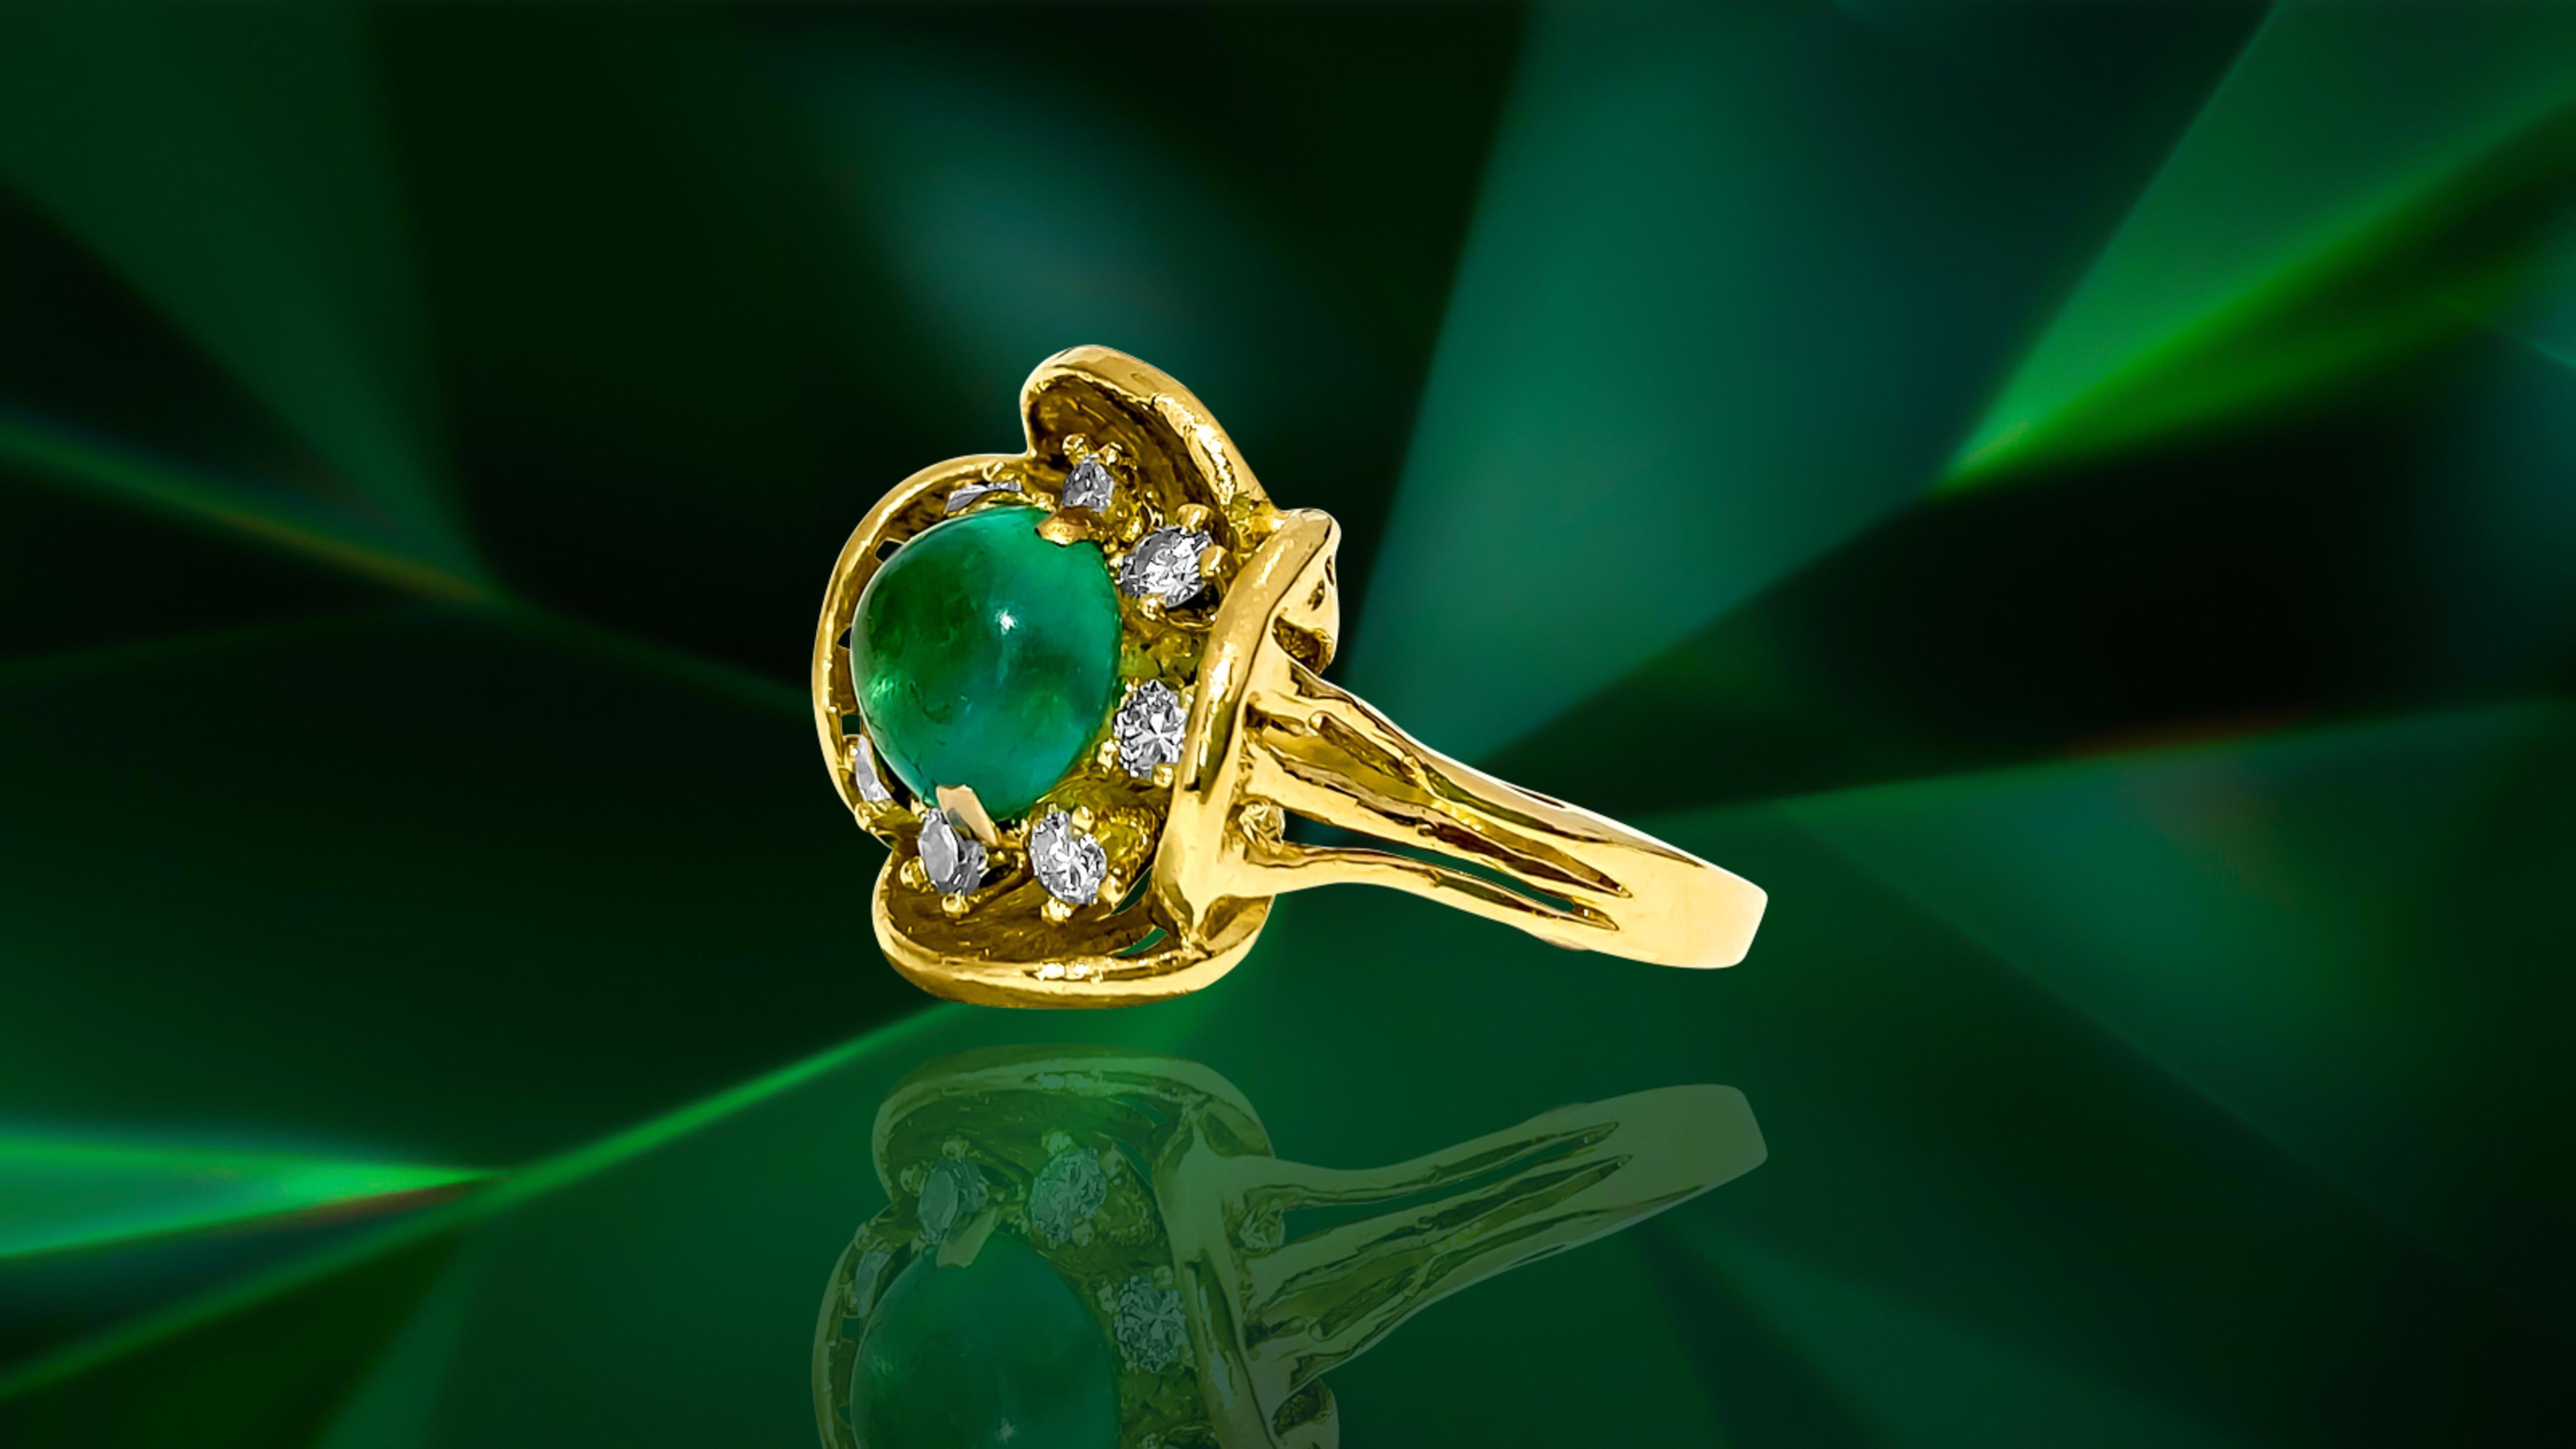 Crafted in 18K yellow gold, this vintage ring features a stunning 2.50 carat Colombian emerald in a cabochon cut, exuding timeless elegance. Adorned with 0.40 carats of G color diamonds with VS clarity, each stone is 100% natural earth mined and set